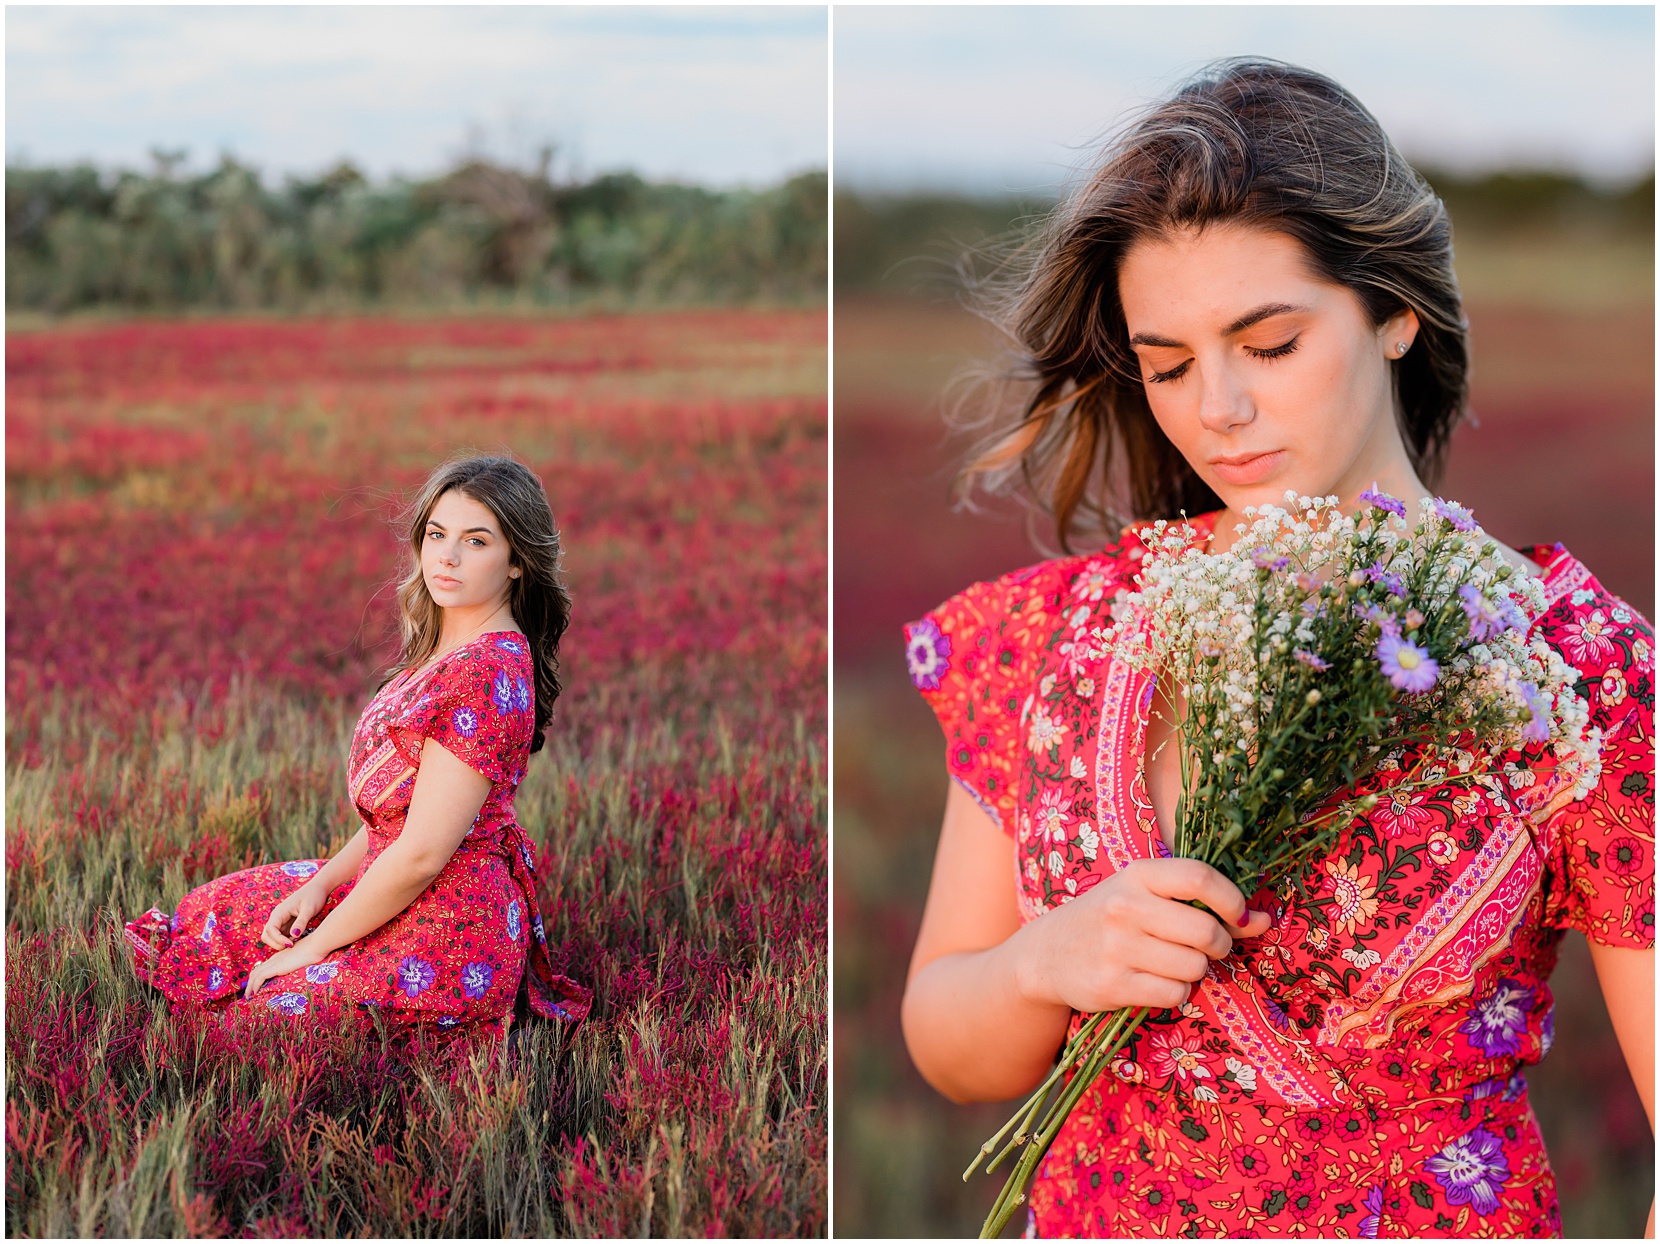 teen girl in red dress skipping through a field of red flowers near the beach in ocean city, nj